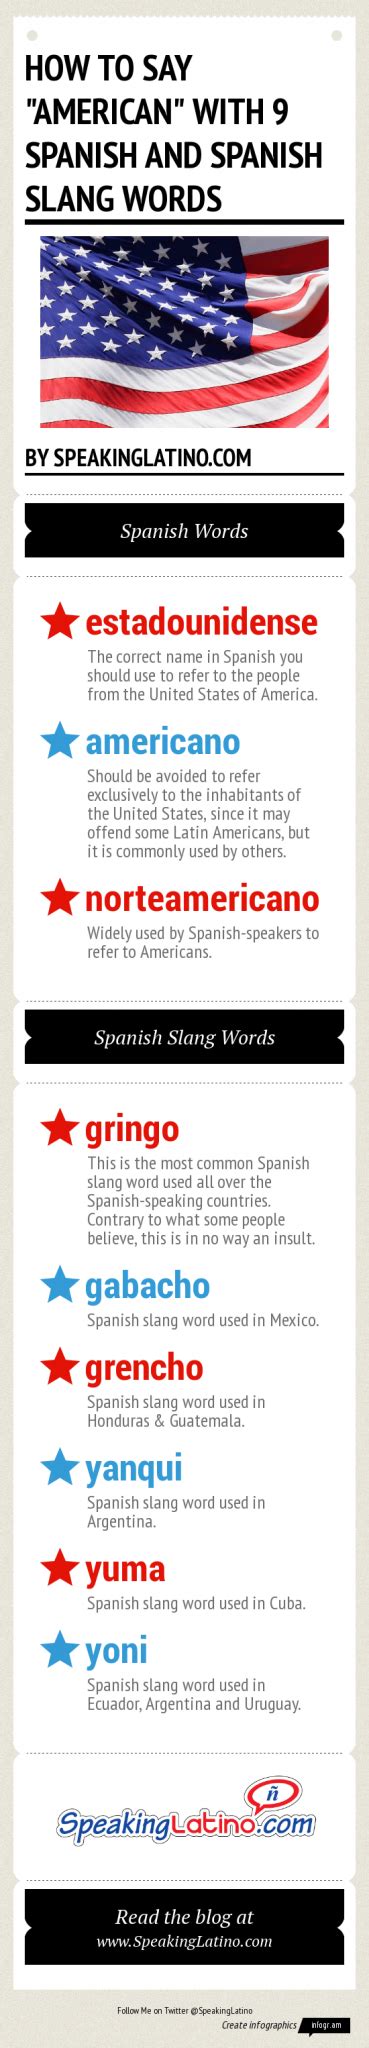 How To Say American With 9 Spanish And Spanish Slang Words Infographic